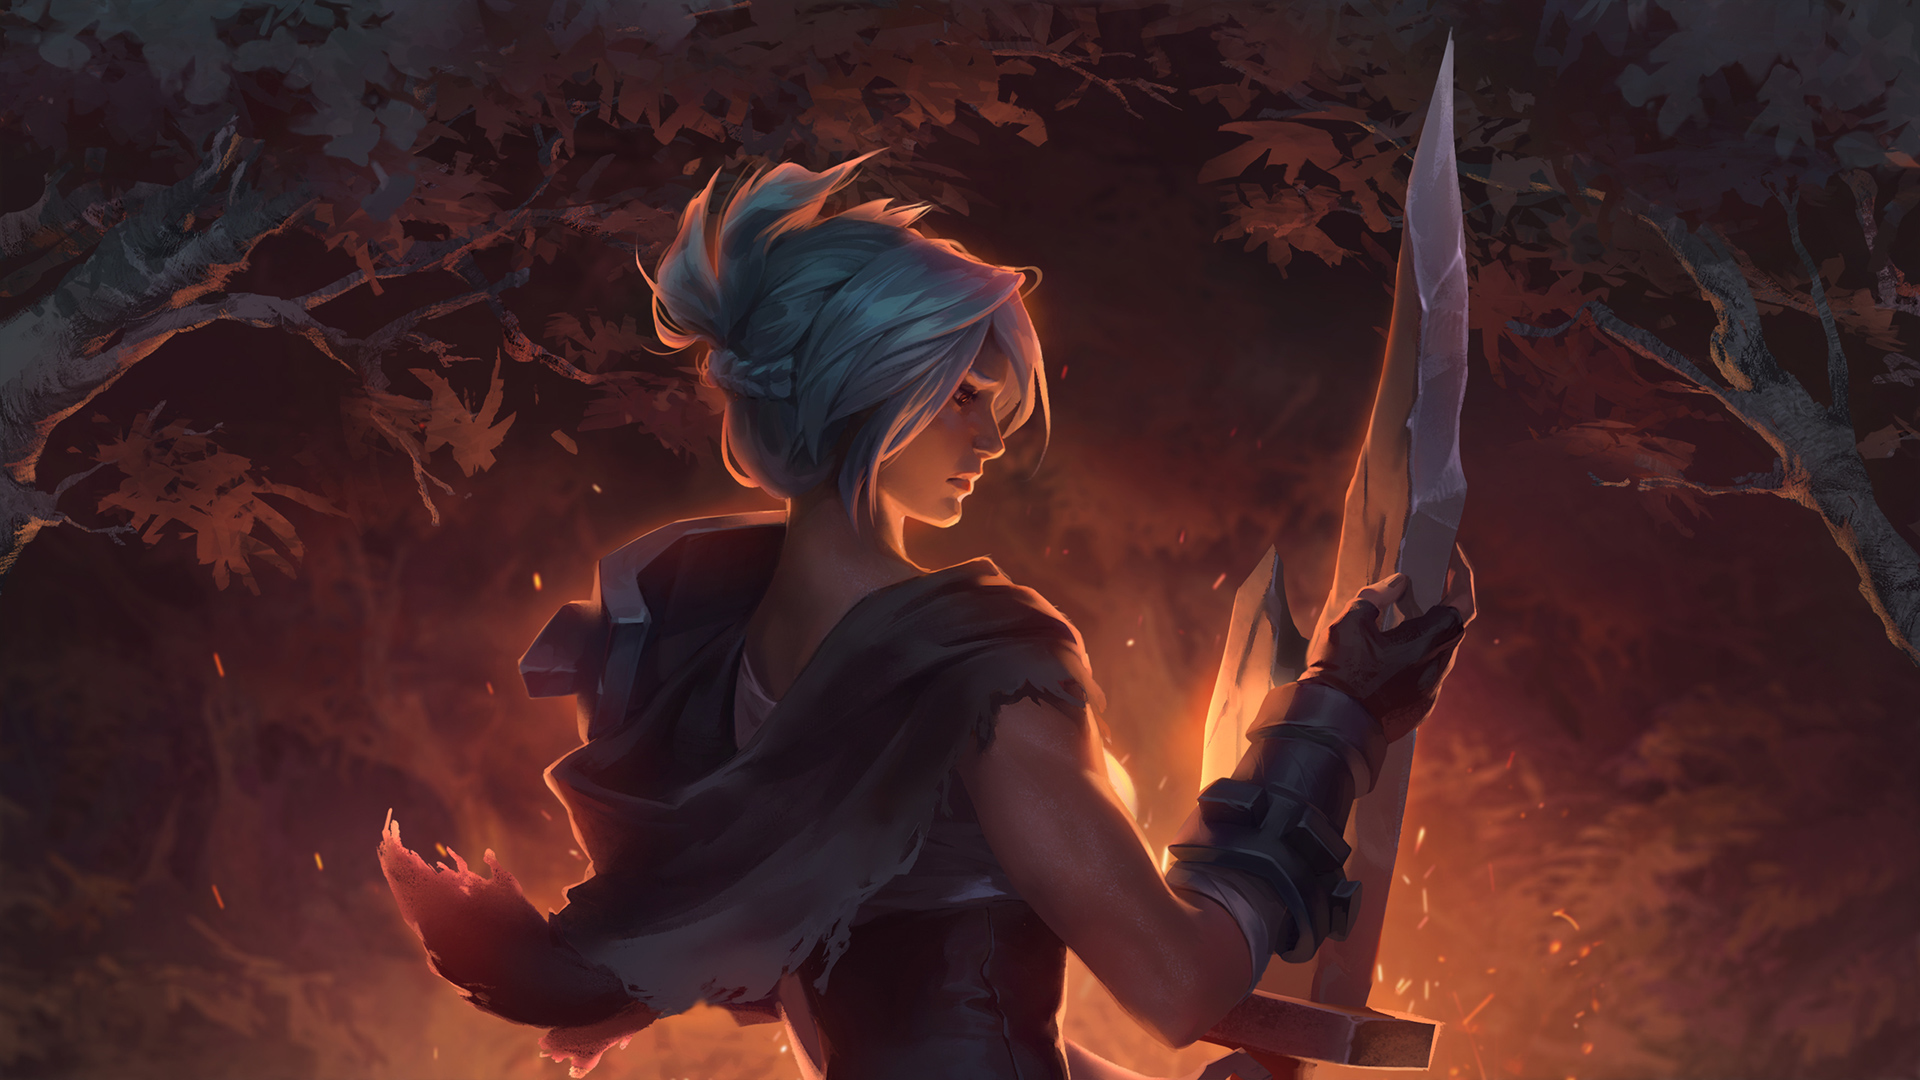 Dragonblade Riven spotlight, price, release date and more